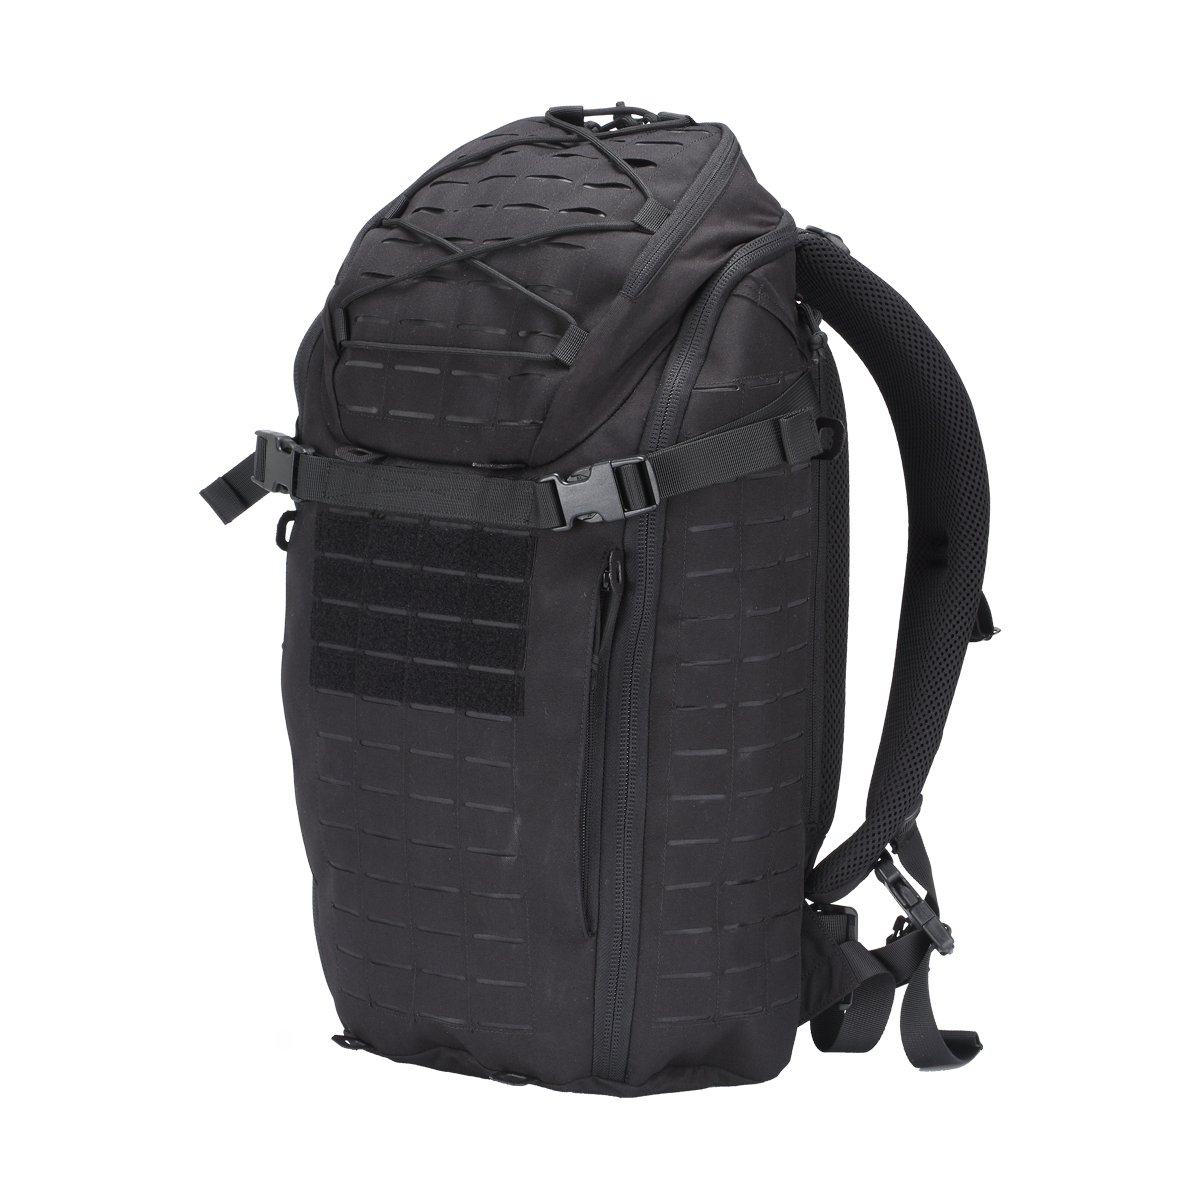 5.11 Tactical Rush 12 2.0 review: one mighty little EDC backpack